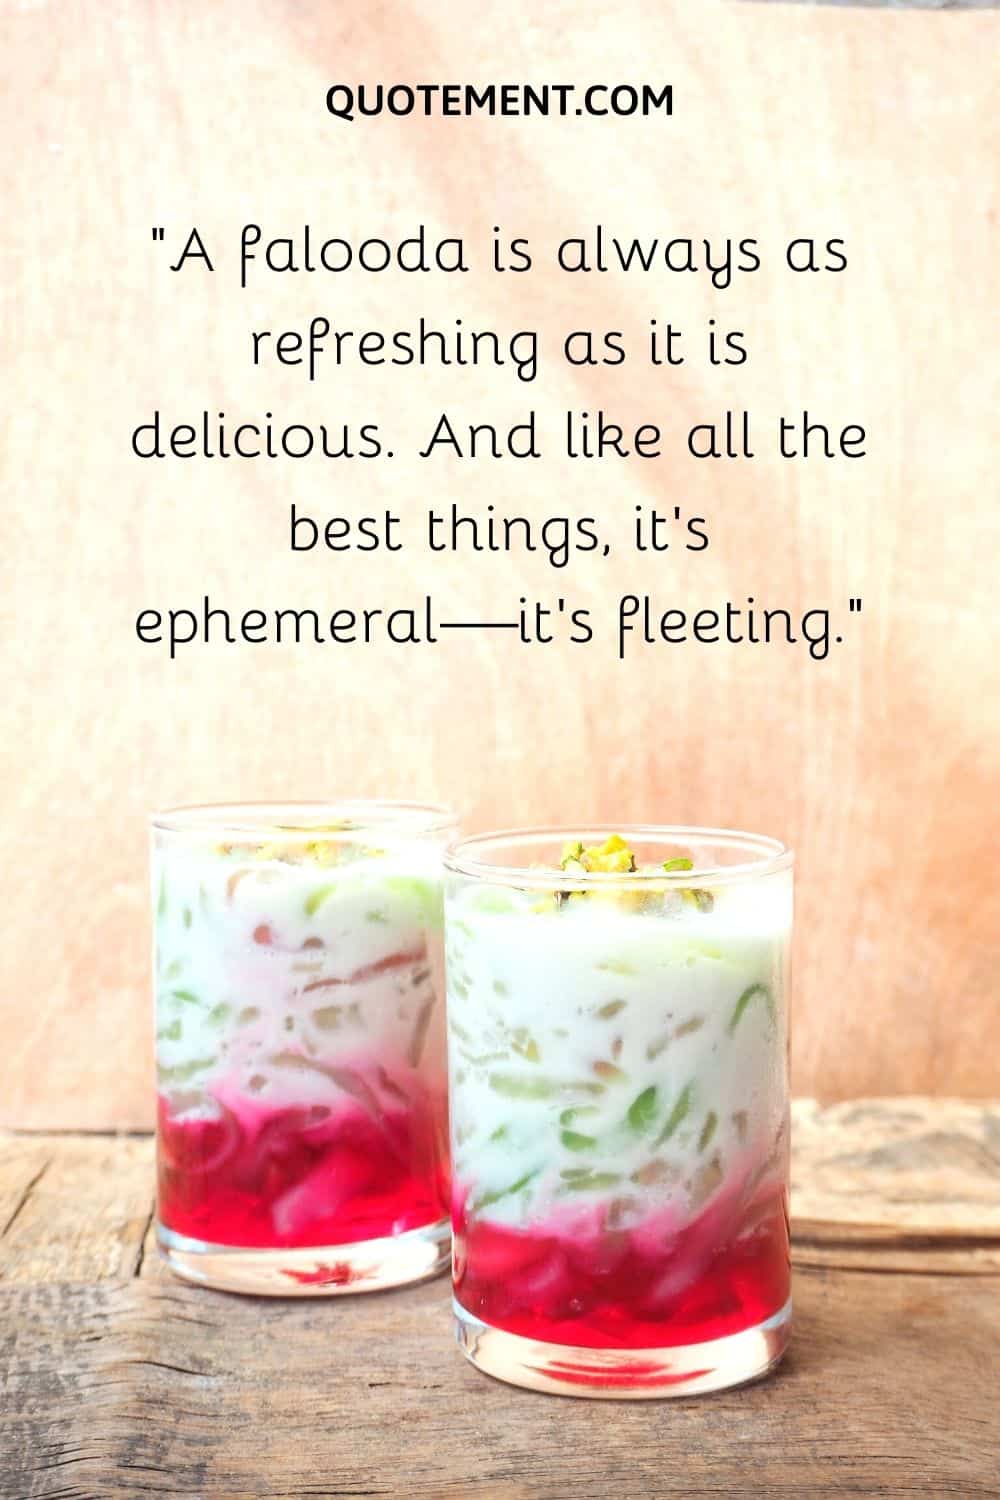 A falooda is always as refreshing as it is delicious